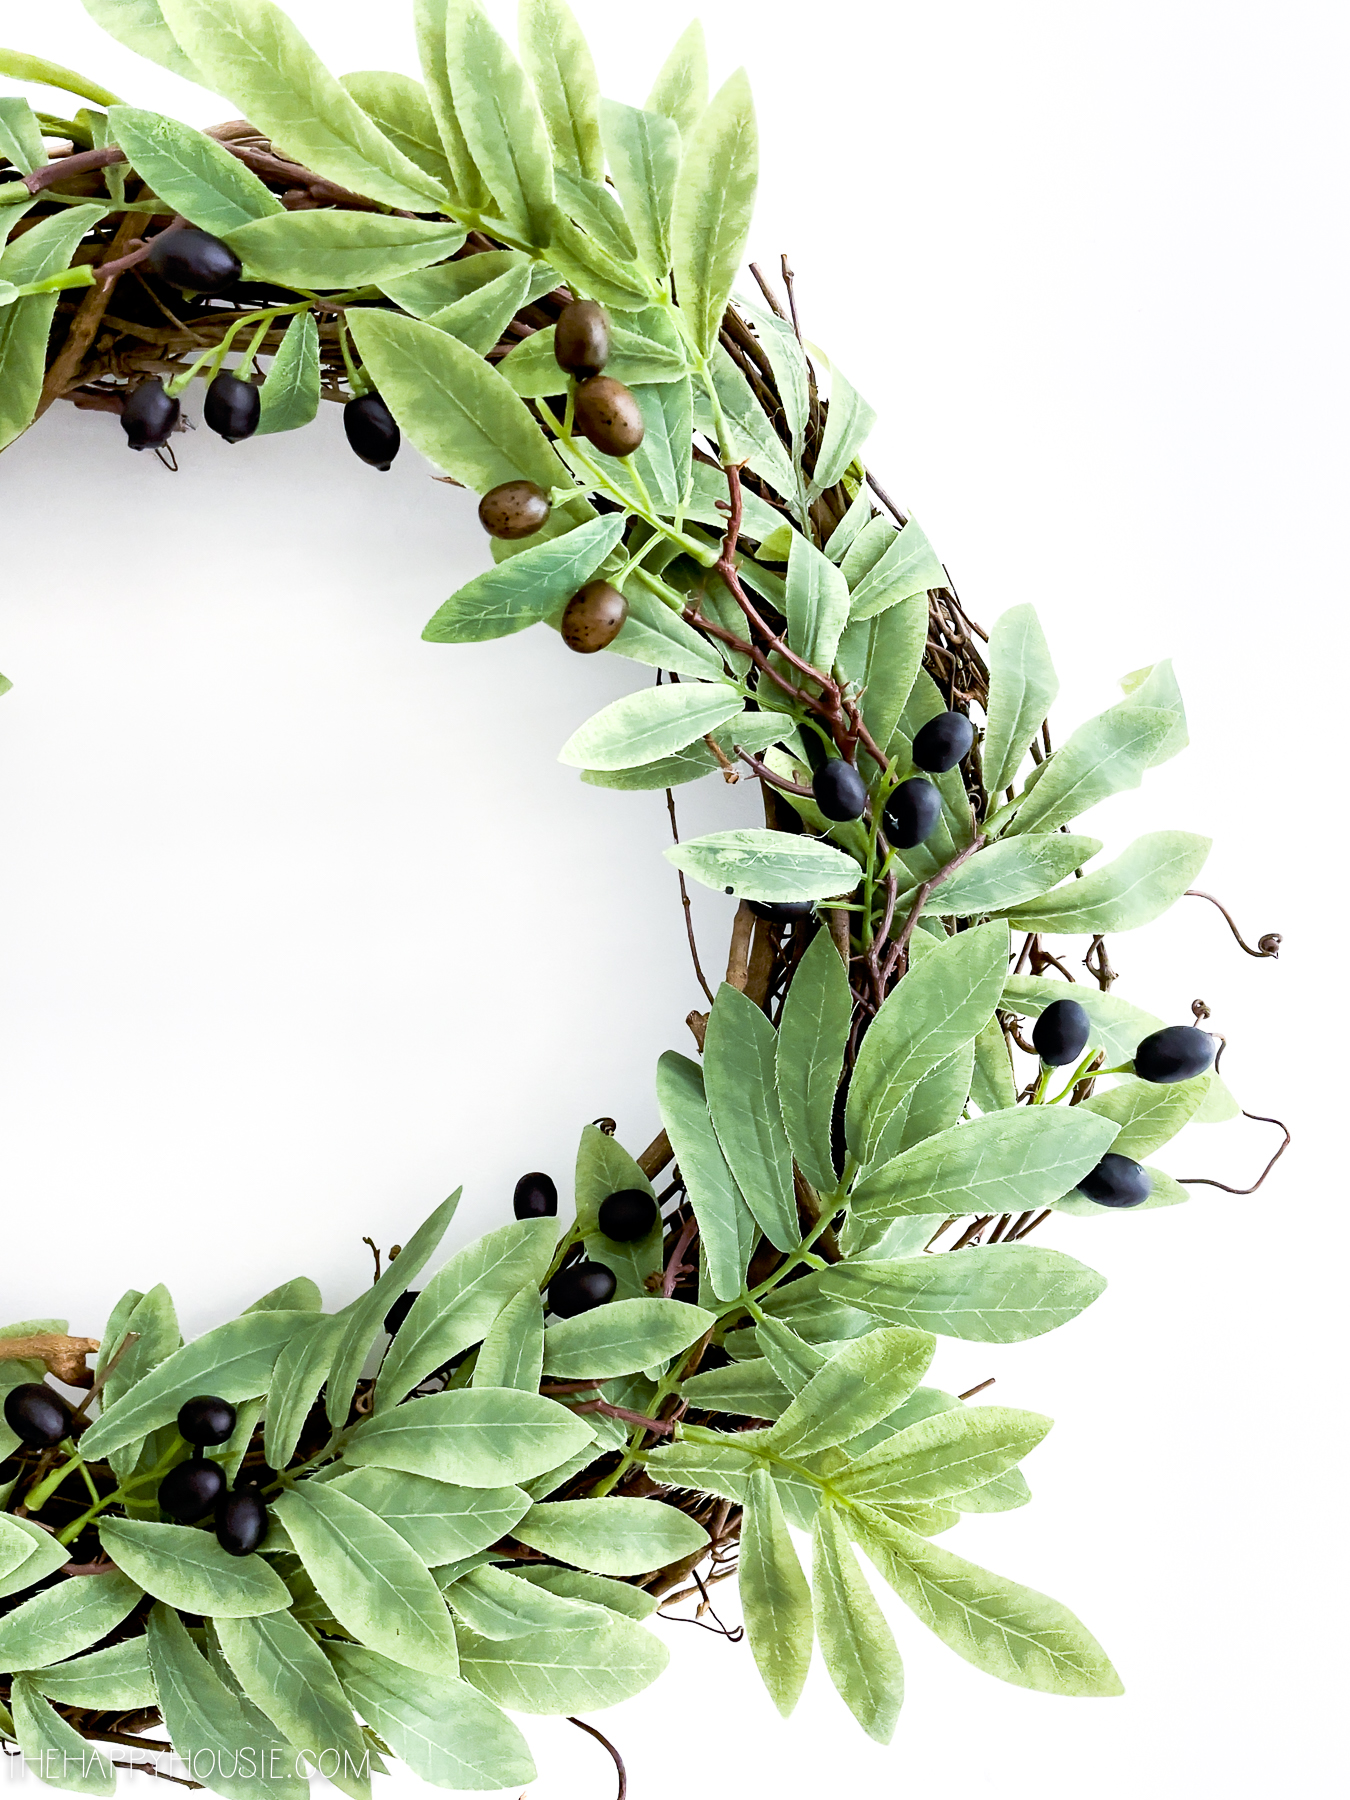 Up close details of the olive wreath.